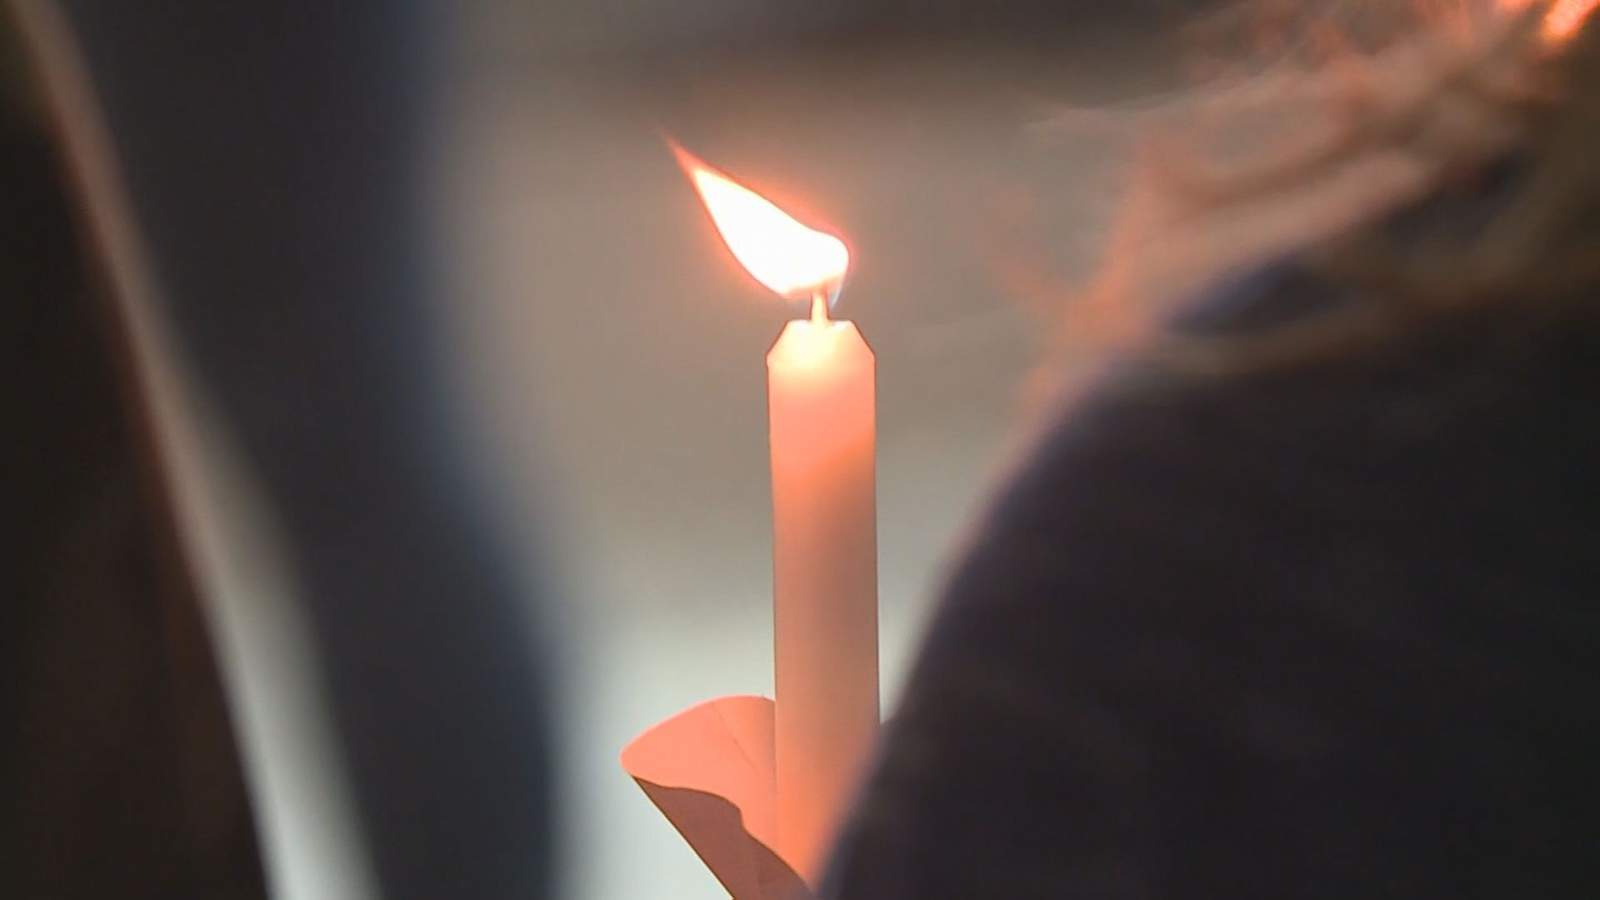 Grieving mother opens candlelight vigil to all families impacted by homicide